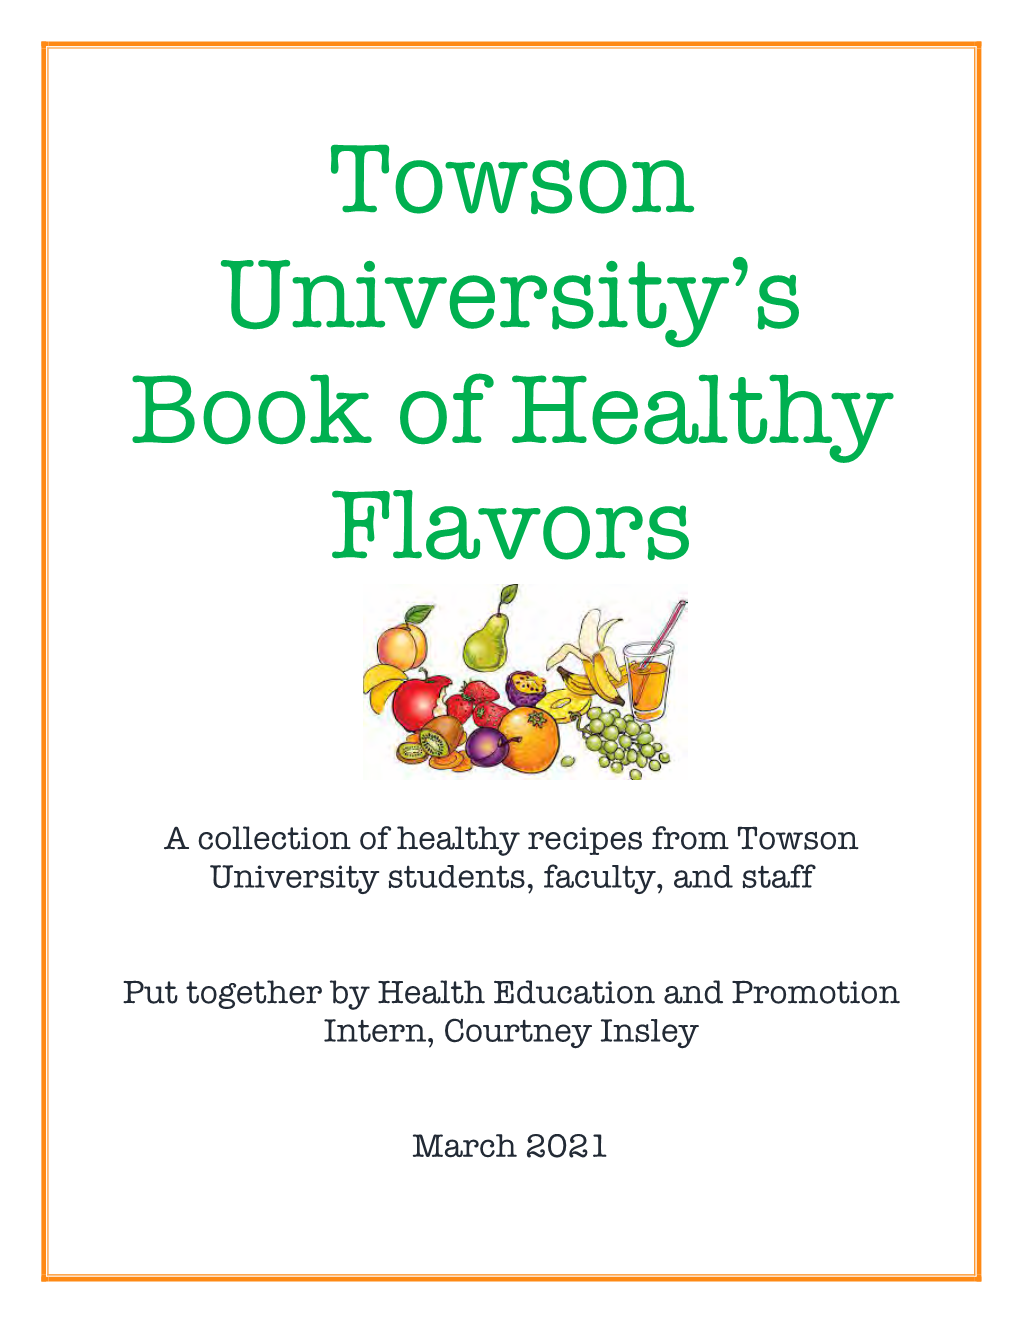 Book of Healthy Flavors (PDF)